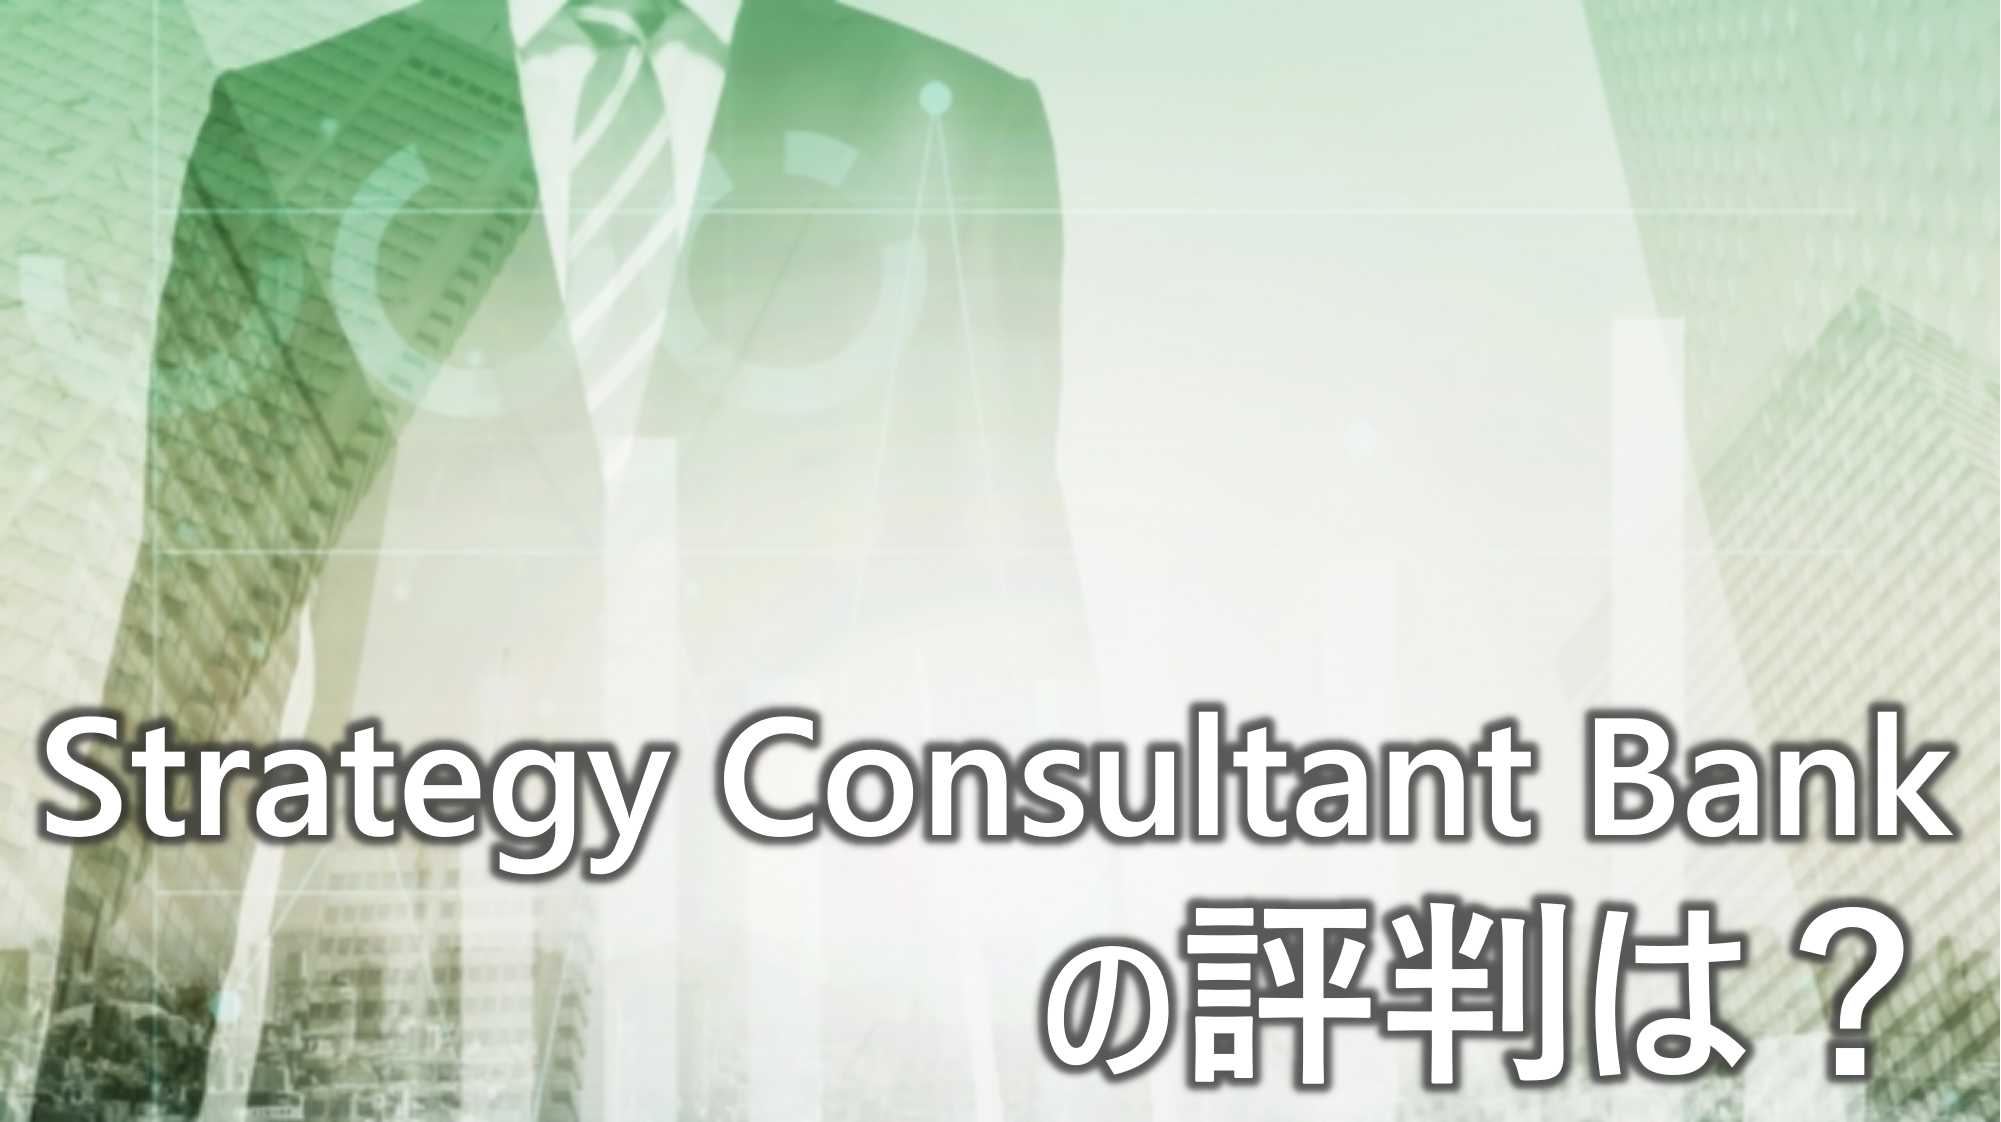 Strategy Consultant Bank　評判　口コミ　メリット　デメリット　案件　詳しく　解説